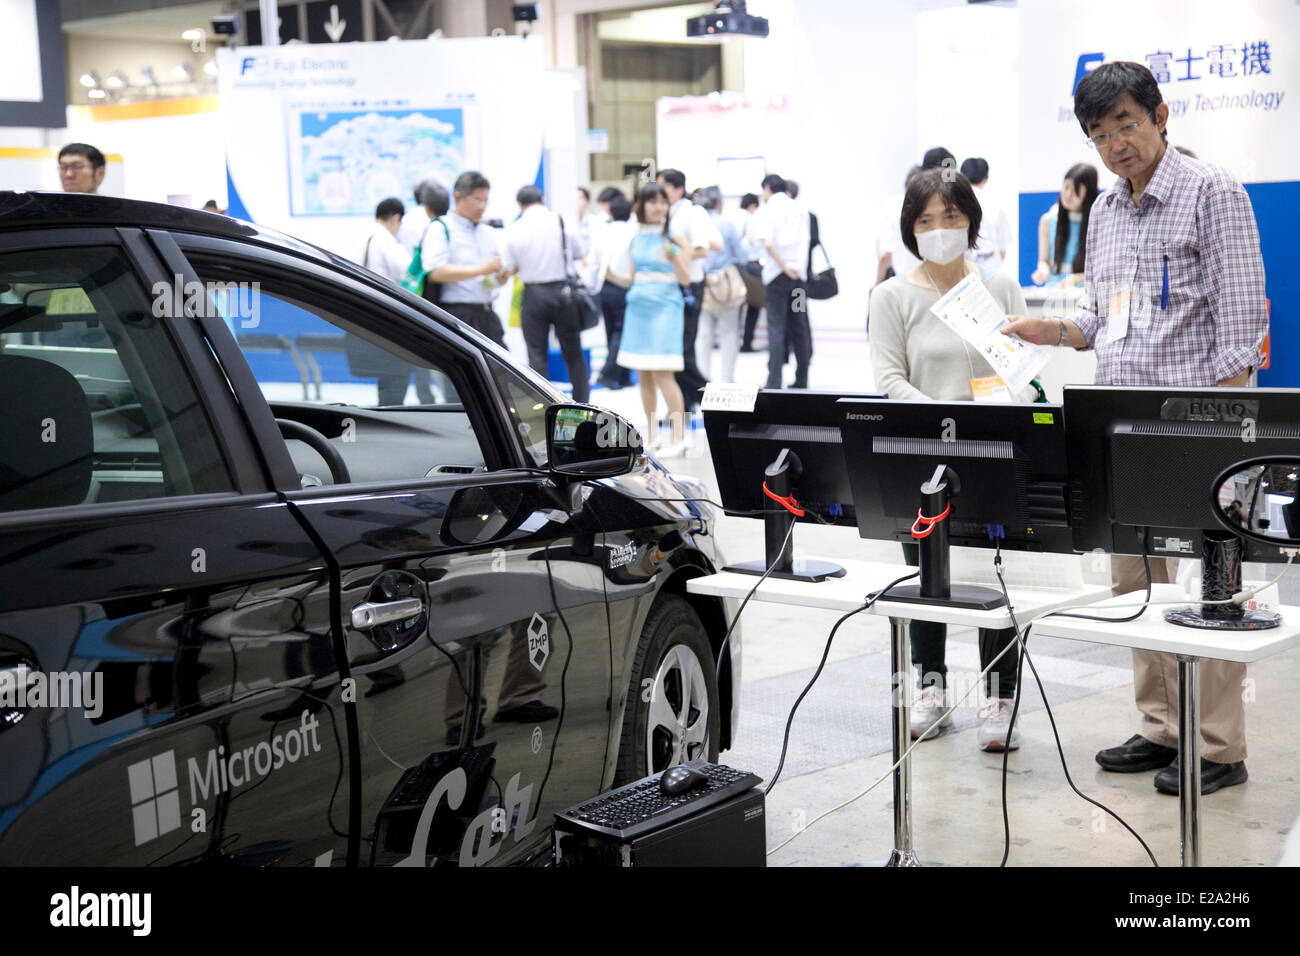 Tokyo, Japan. 18th June, 2014. – Visitors sees the ZMP 'RoboCar' at the Smart Community Japan 2014 in Tokyo Big Sight on June 18, 2014. The exhibition brings the latests products and technologies divided in 5 categories, 'Smart Community Exhibition', 'Biomass Expo', 'Next Generation Vehicle Exhibition, and newly-created 'Community Cloud 2014', which introduces technology for urban development. This year 229 enterprises and organizations shows their products from June 18th to 20th. Credit:  Aflo Co. Ltd./Alamy Live News Stock Photo